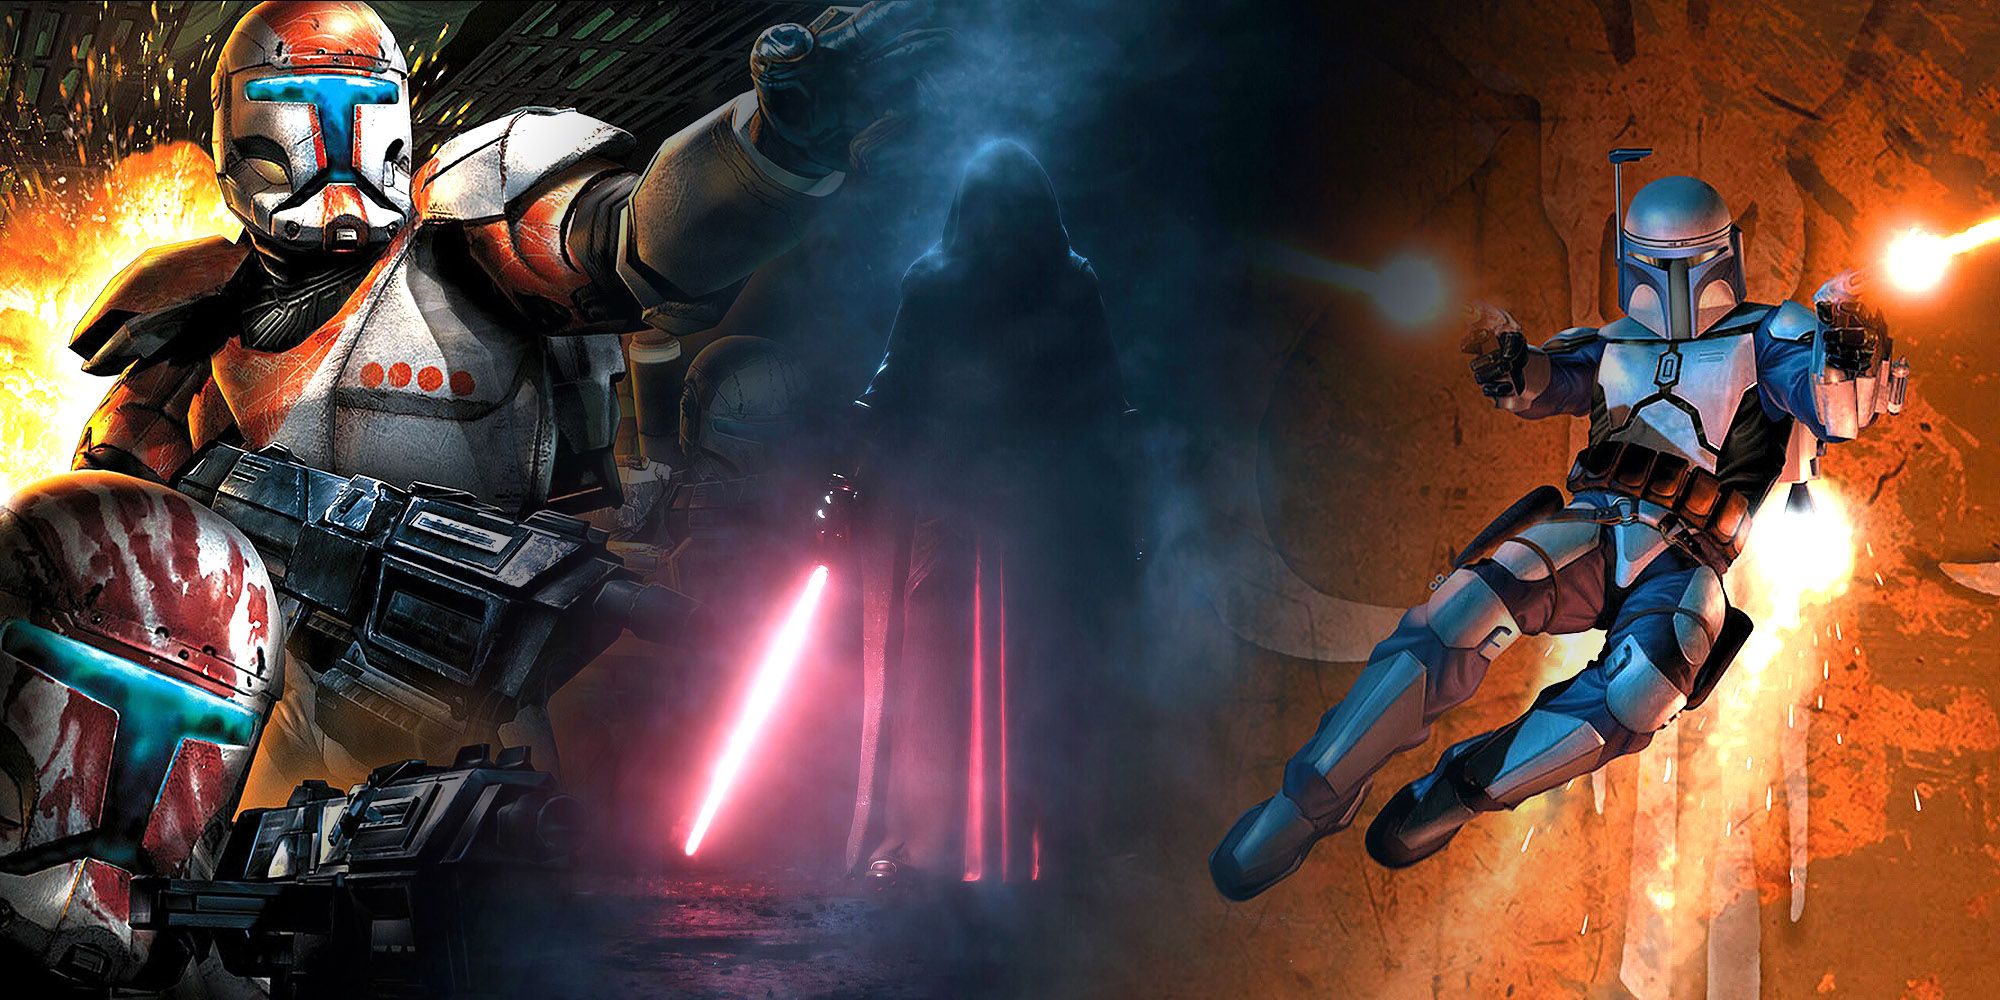 A split image of Mandalorian bounty hunters and Sith in KOTR